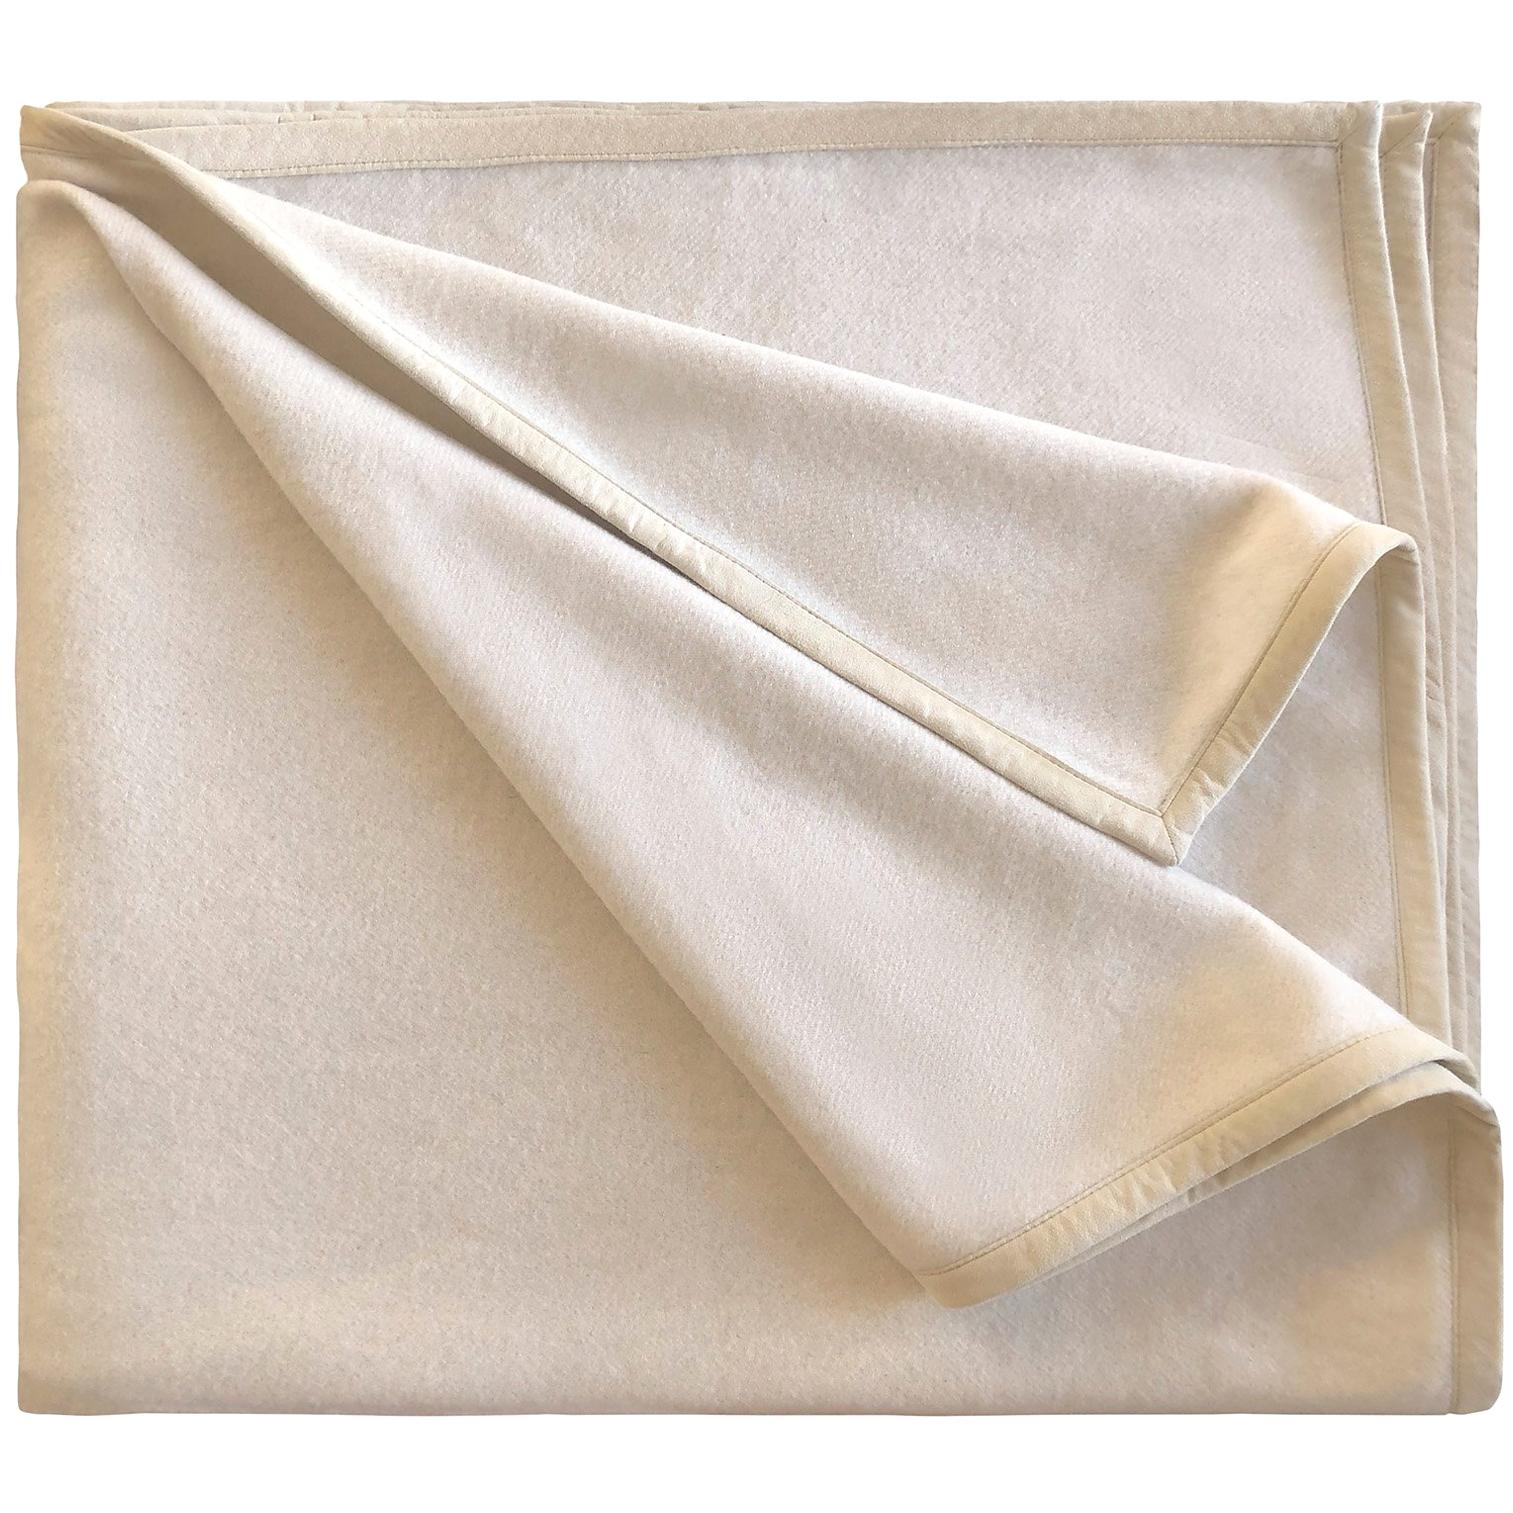 21st Century "Pure" Cashmere and Silk White Throw with Suede Edging For Sale